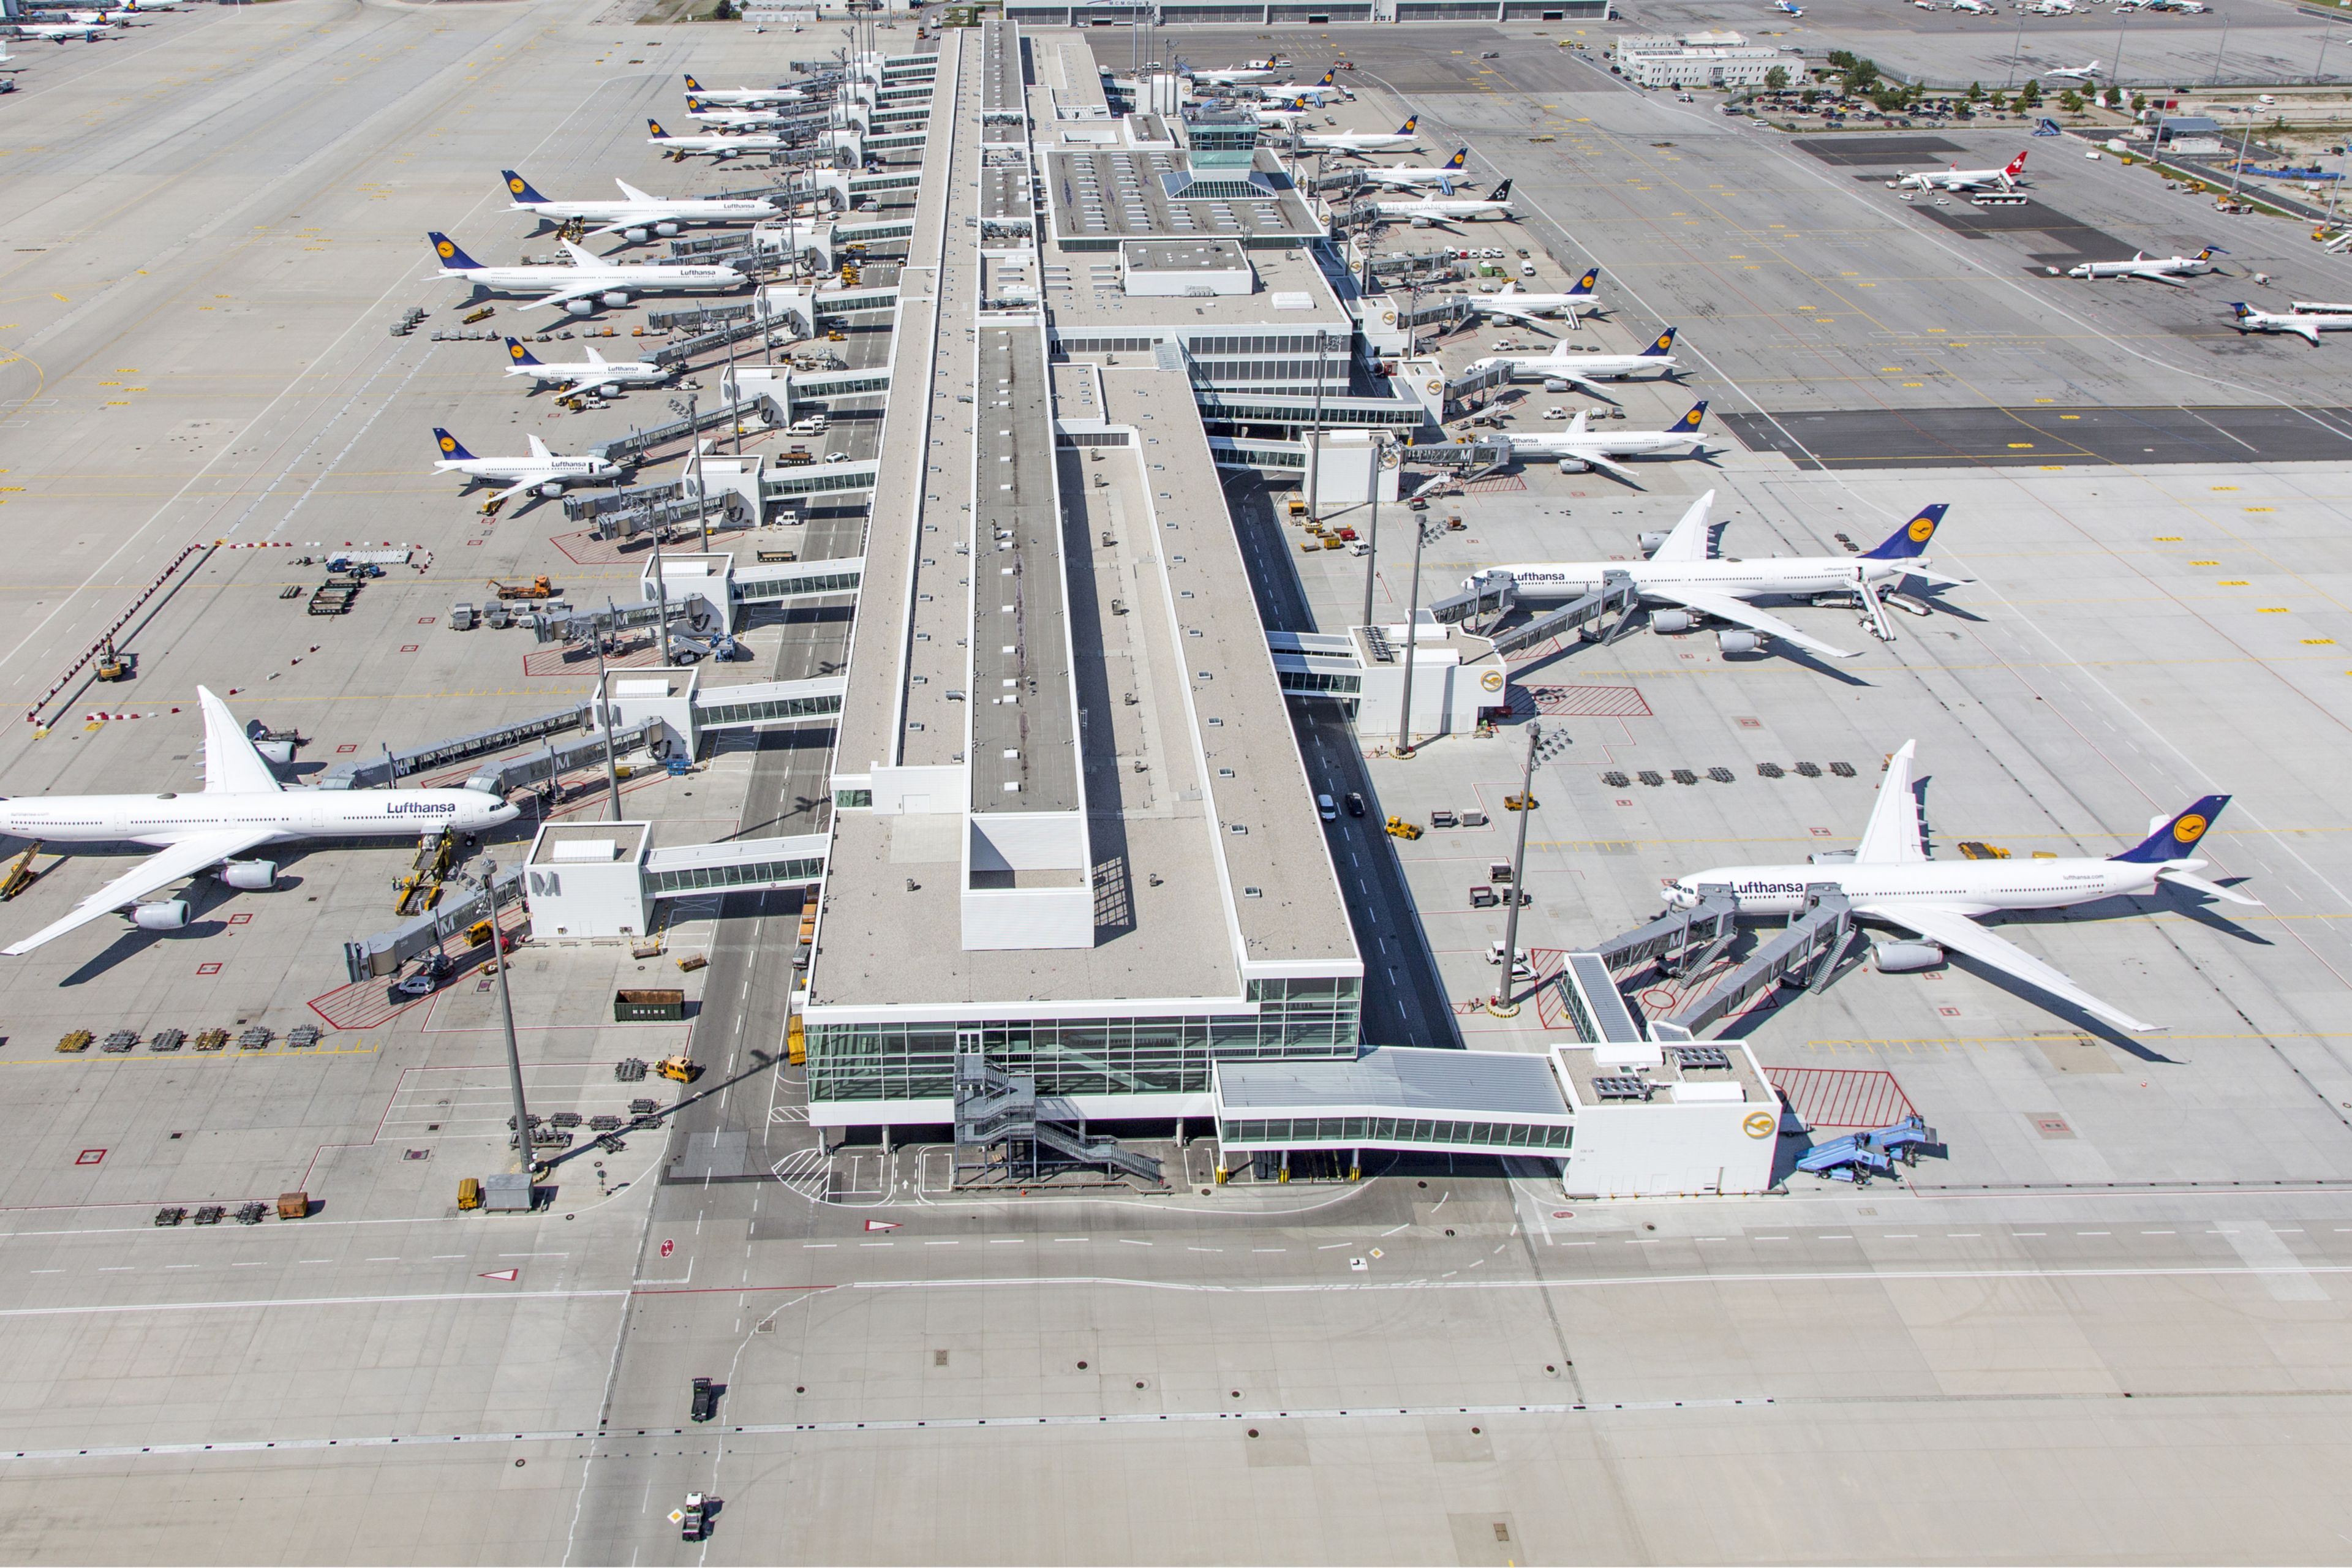 Single-ply roof FPO membrane of Sarnafil installed on Terminal 2-Satellite at Munich Airport in Germany